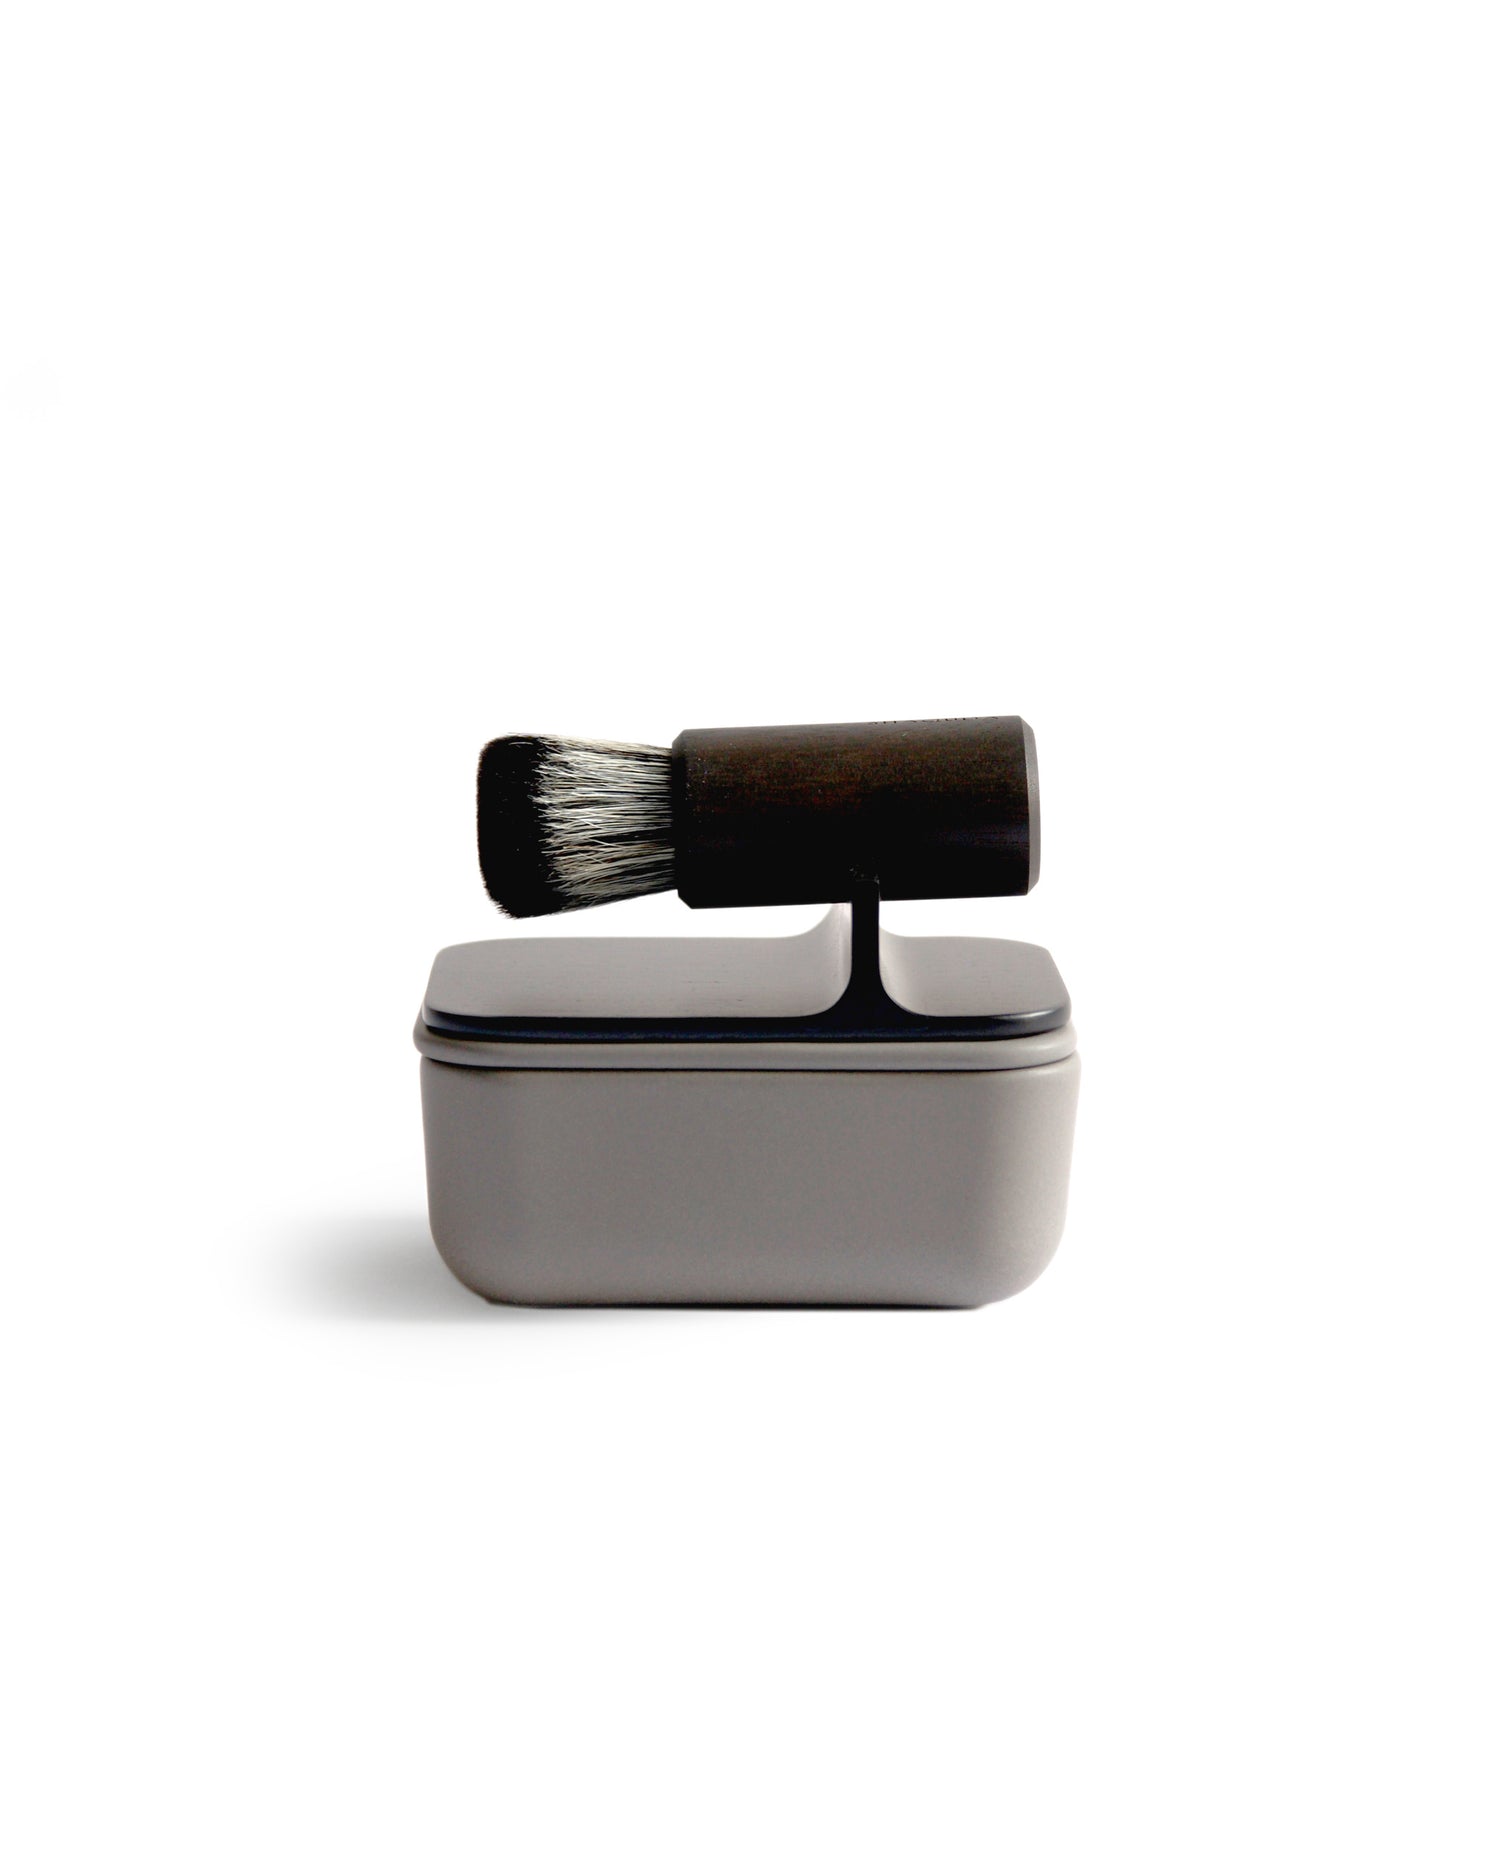 Silhouetted image of hard Jiva face cleansing and shaving series with porcelain bowl and walnut, boar bristle, and goat hair brush by Shaquda against white background. 